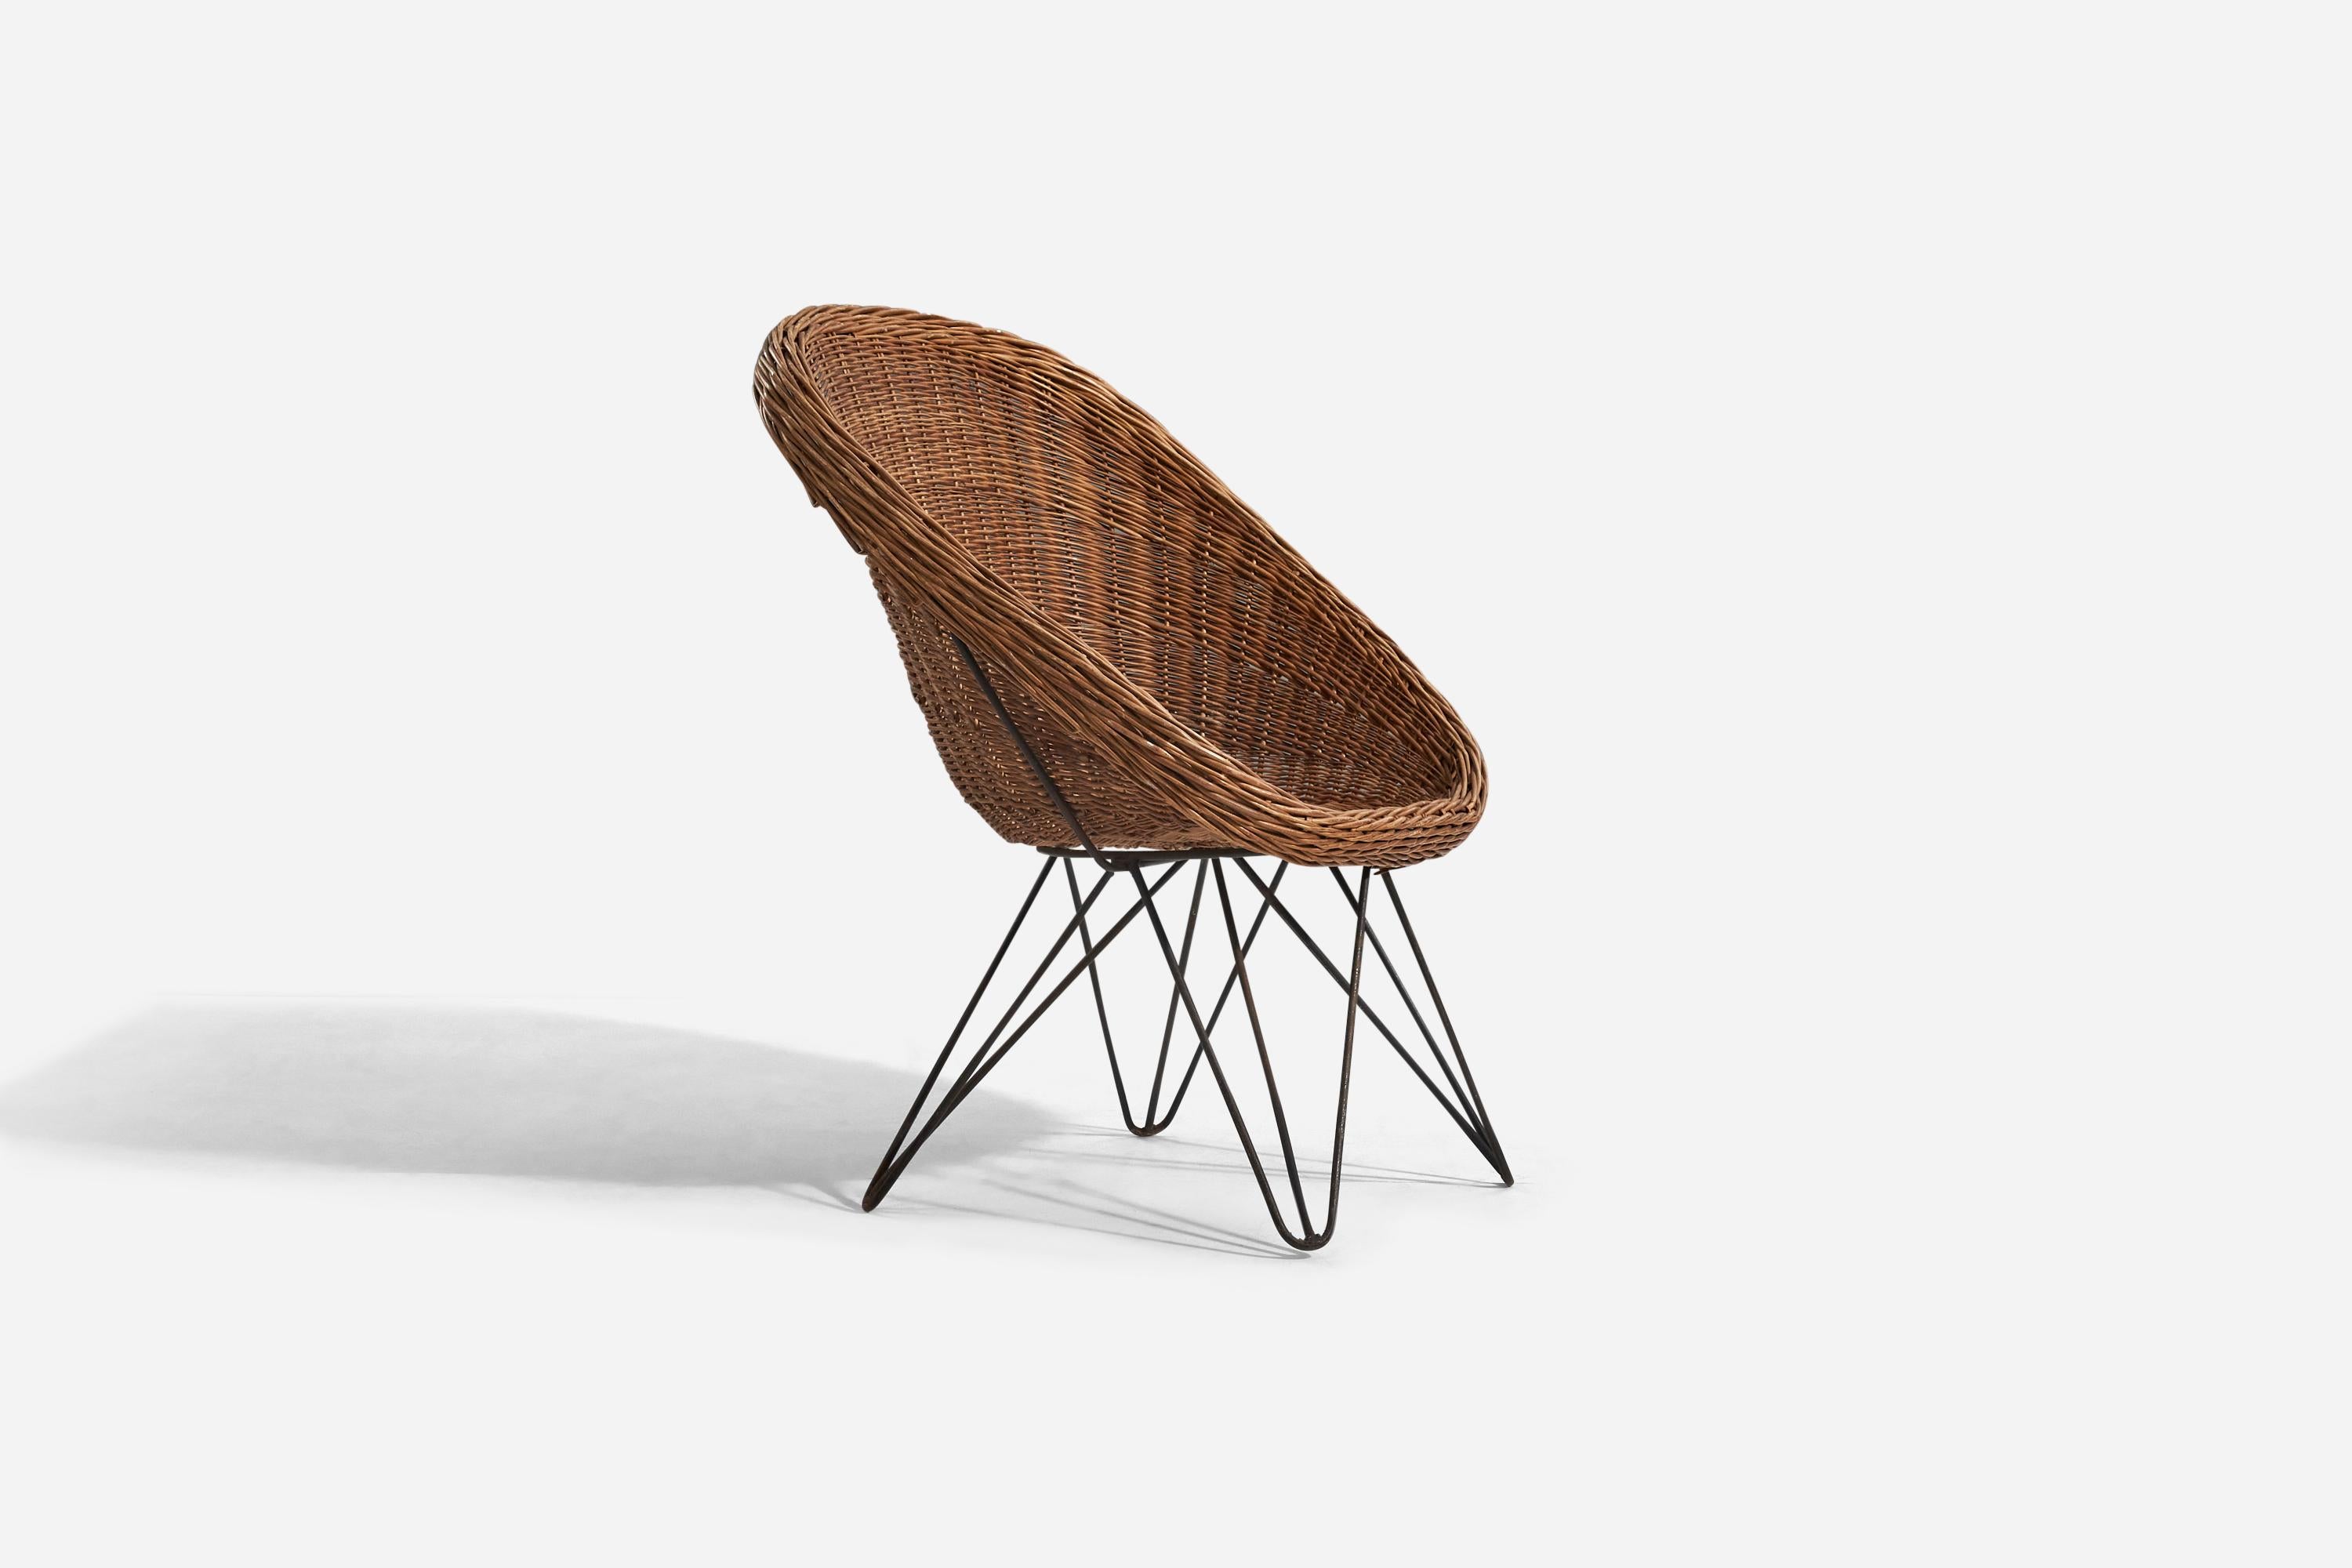 A wicker and metal chair designed and produced in Italy, 1950s.